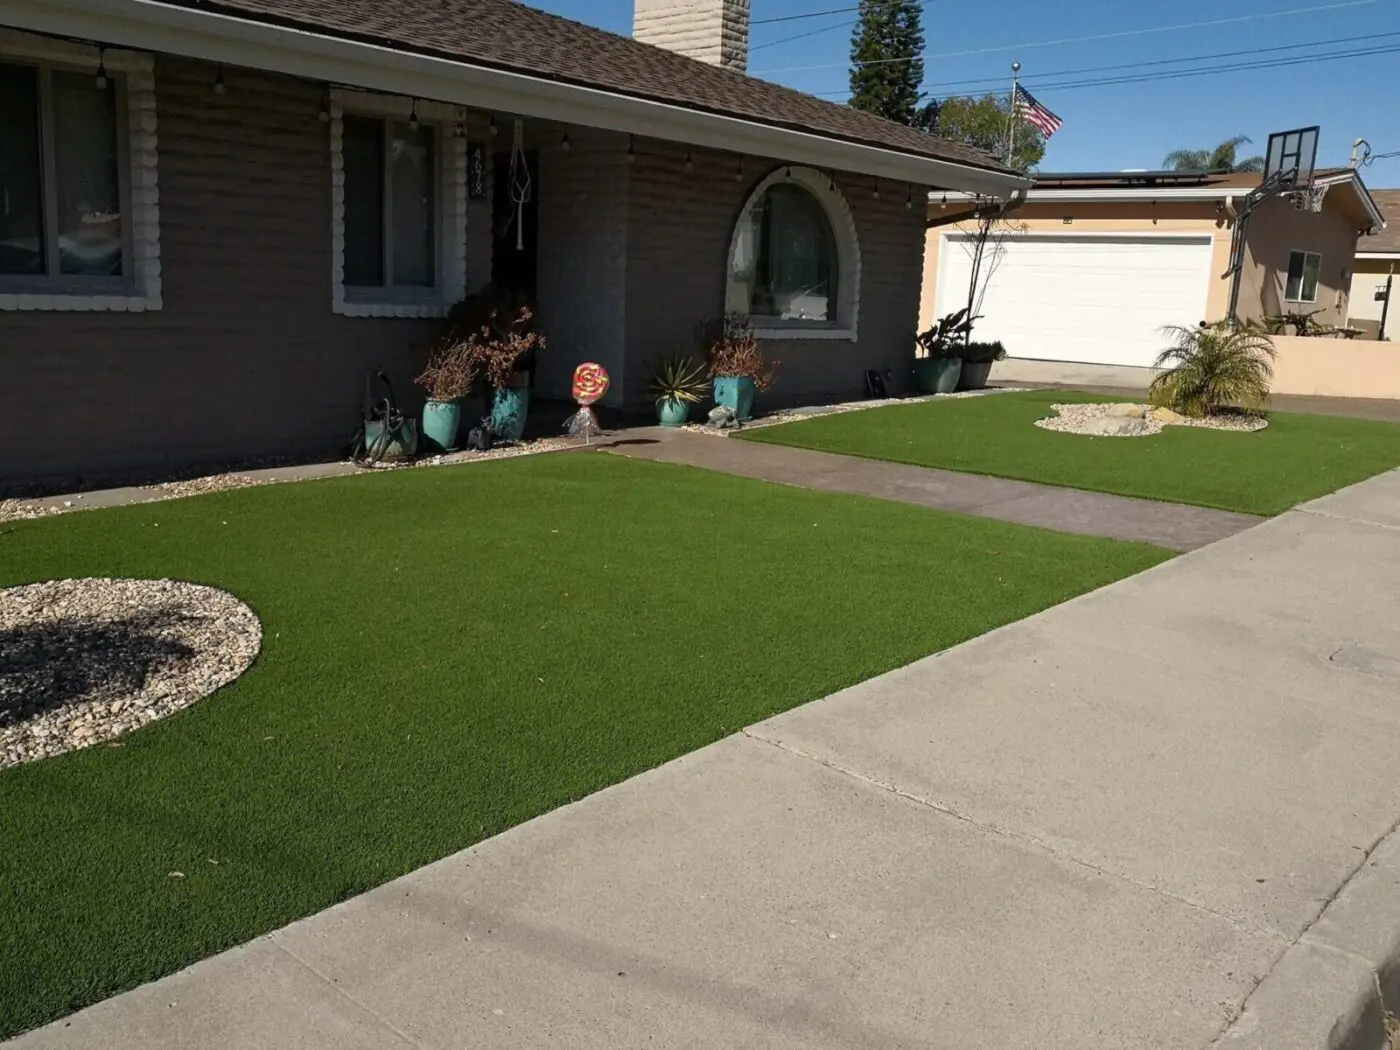 A neatly maintained front yard of a single-story house features artificial grass replacing the lawn, decorated with potted plants near the windows and entrance. A driveway with turf and pavers leads to a white garage door, and an American flag is visible in the background.